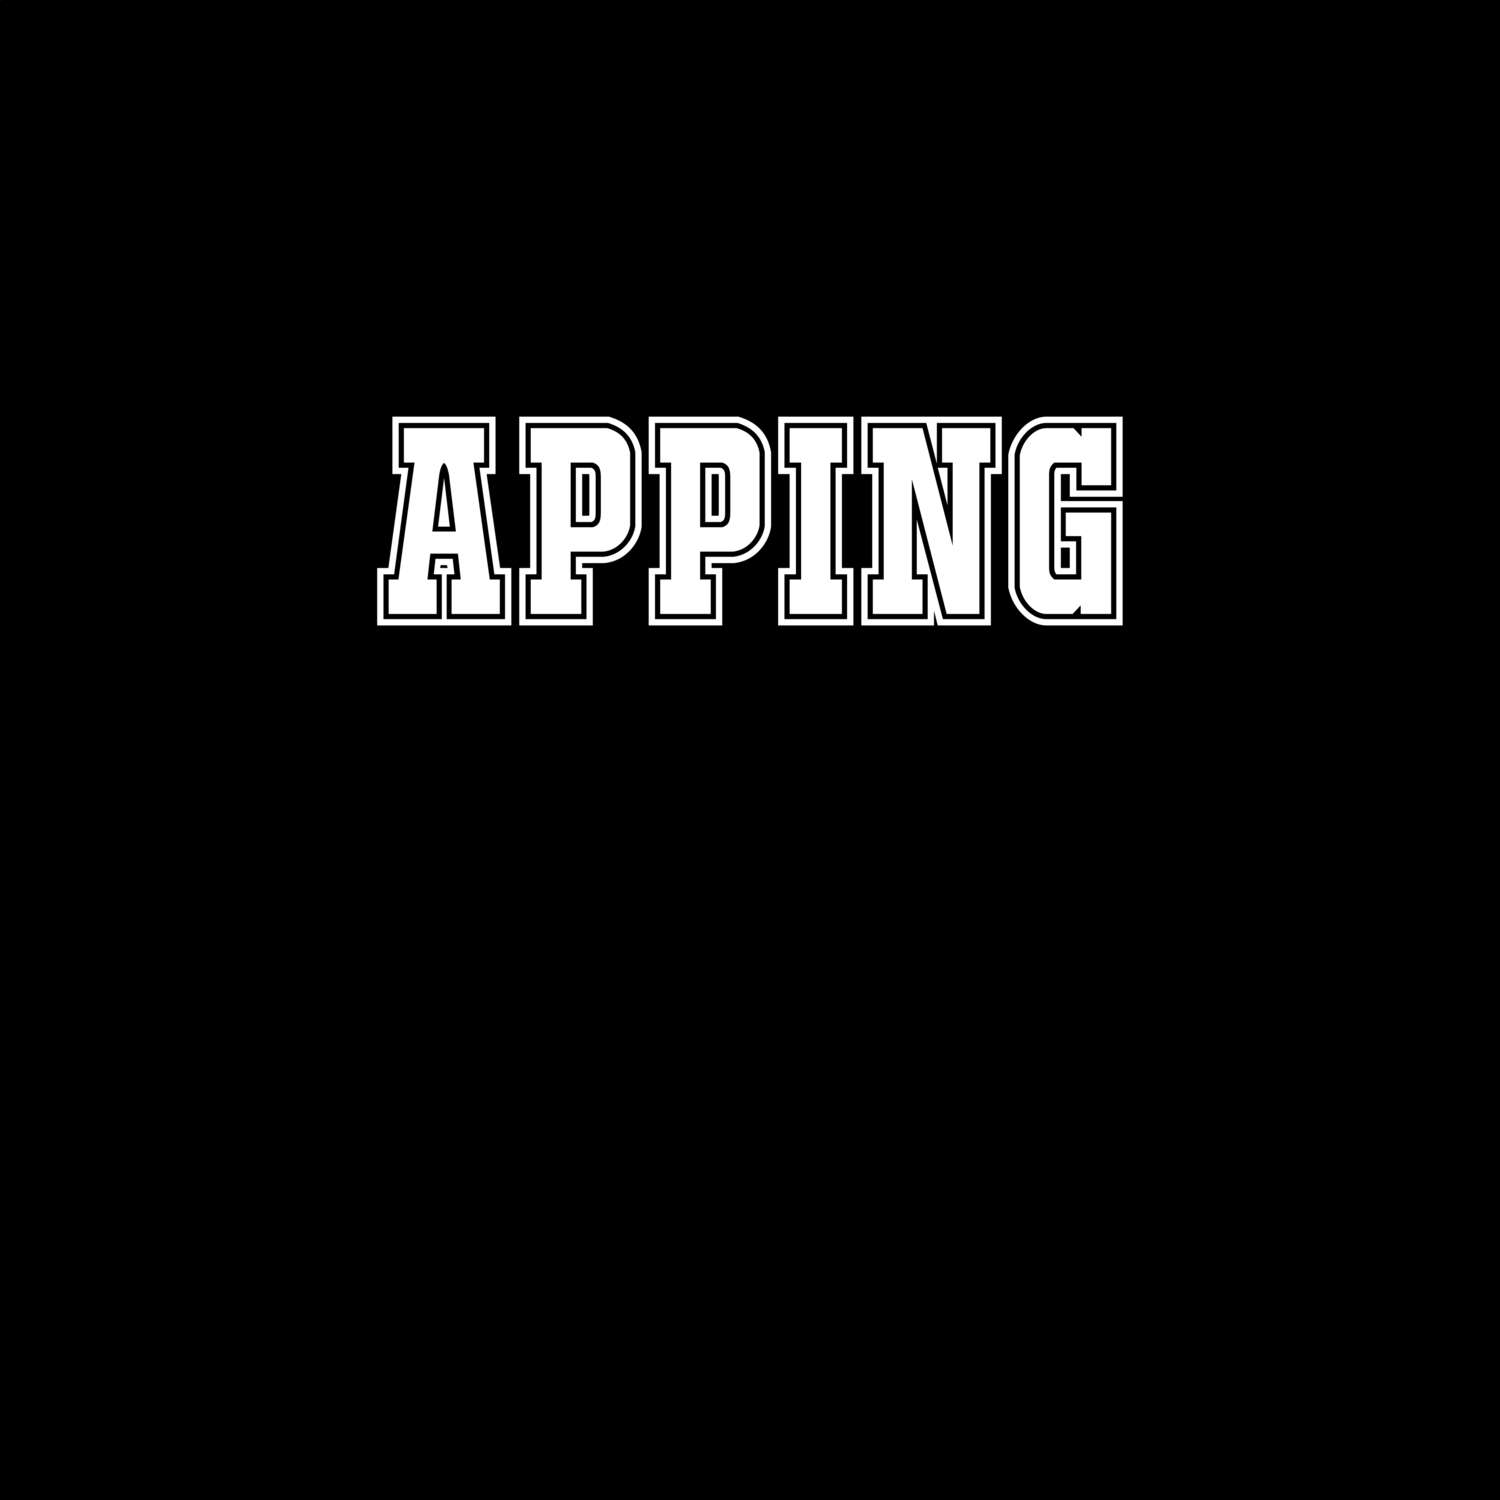 Apping T-Shirt »Classic«